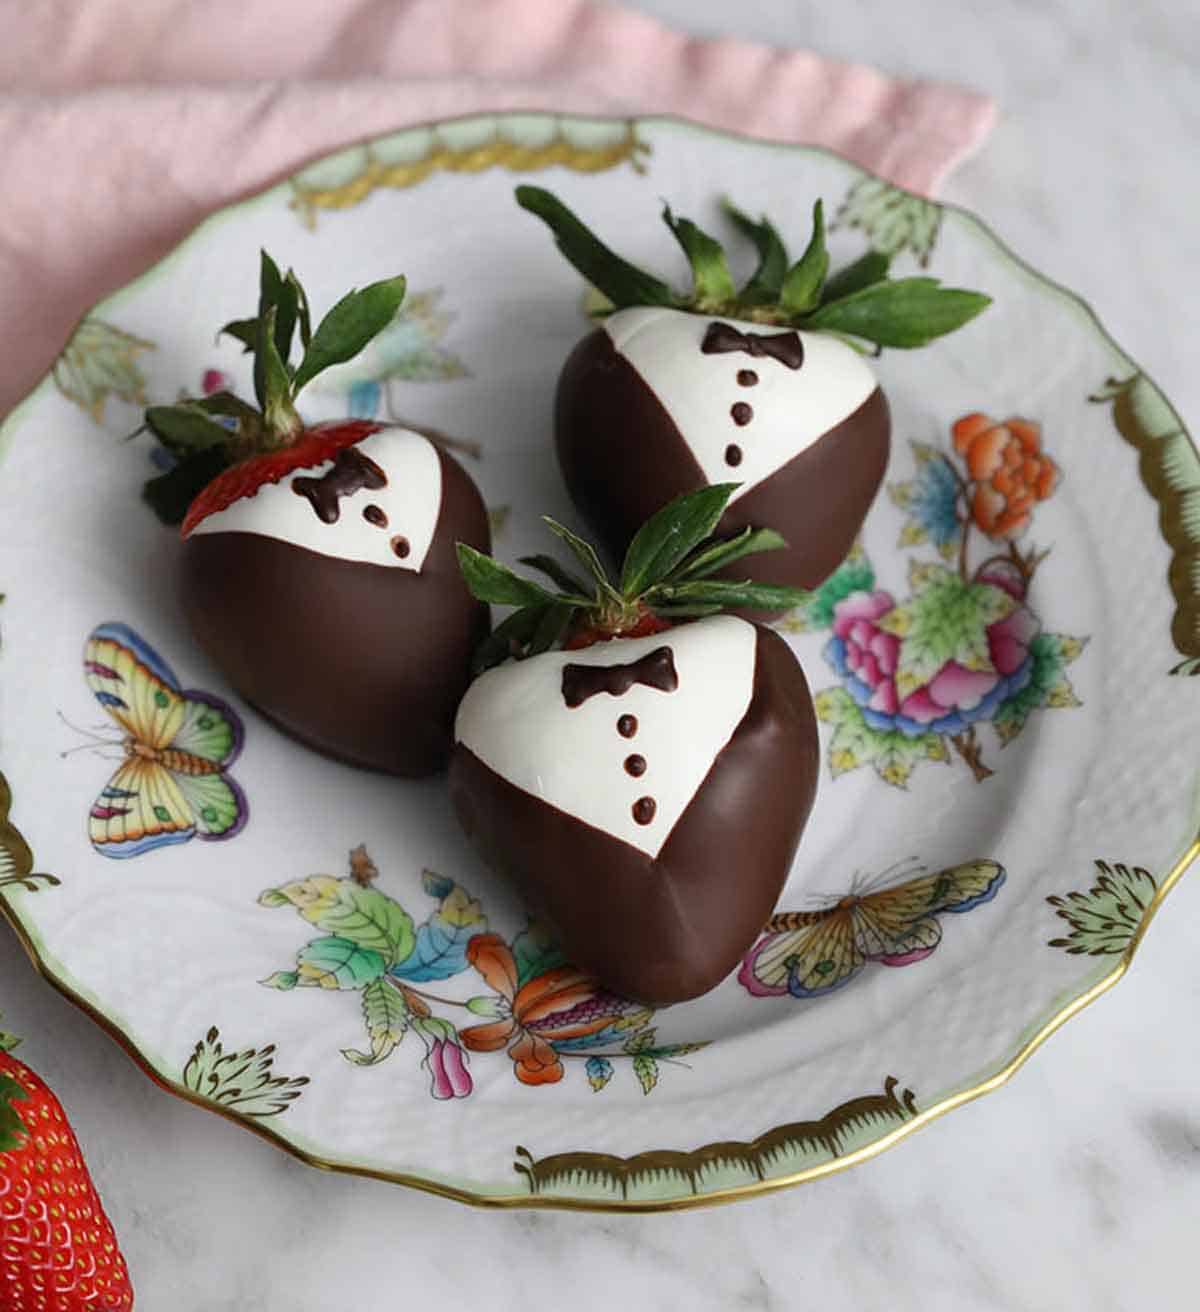 A plate of three chocolate covered strawberries decorated like tuxedos.